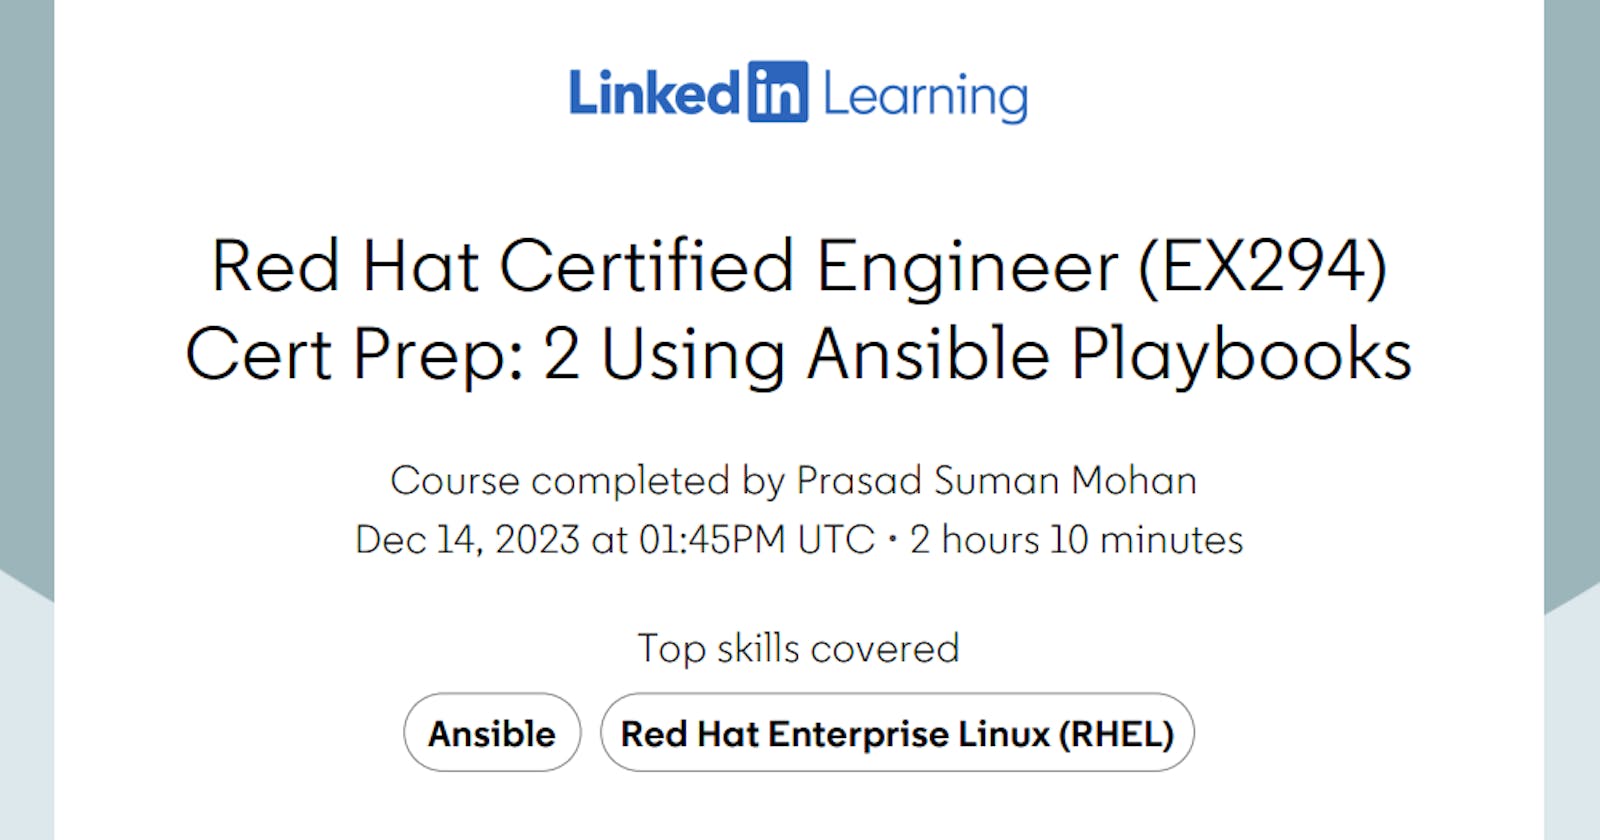 Ansible Playbooks: A Journey through the Red Hat Certified Engineer (EX294) Course 🚀